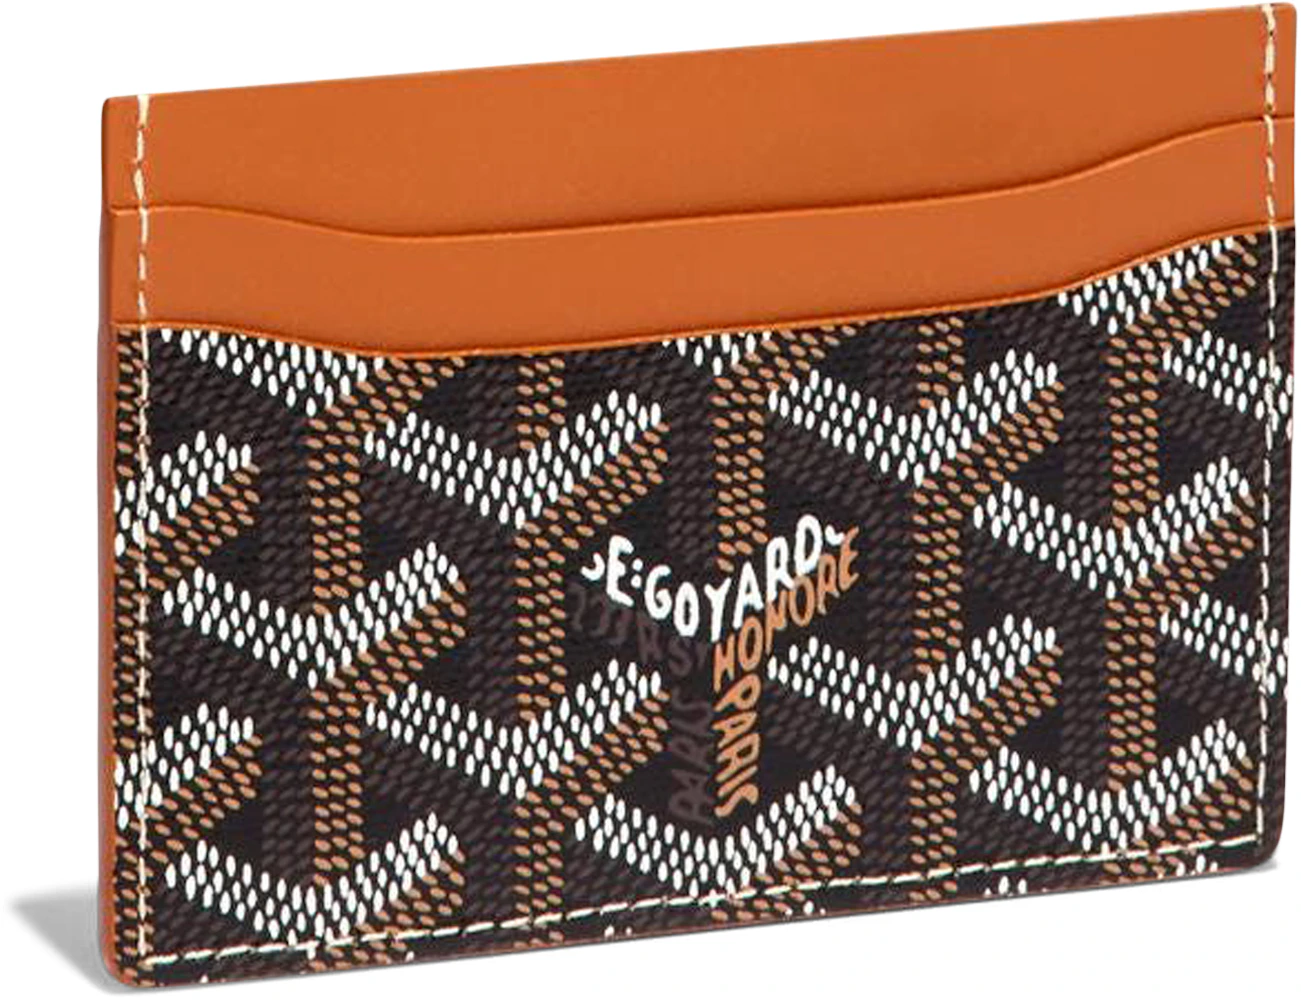 I just received a Pocket Organizer and I can't say I am super impressed. I  was carrying a Goyard St. Sulpice card holder and it was so thin. This  might take some